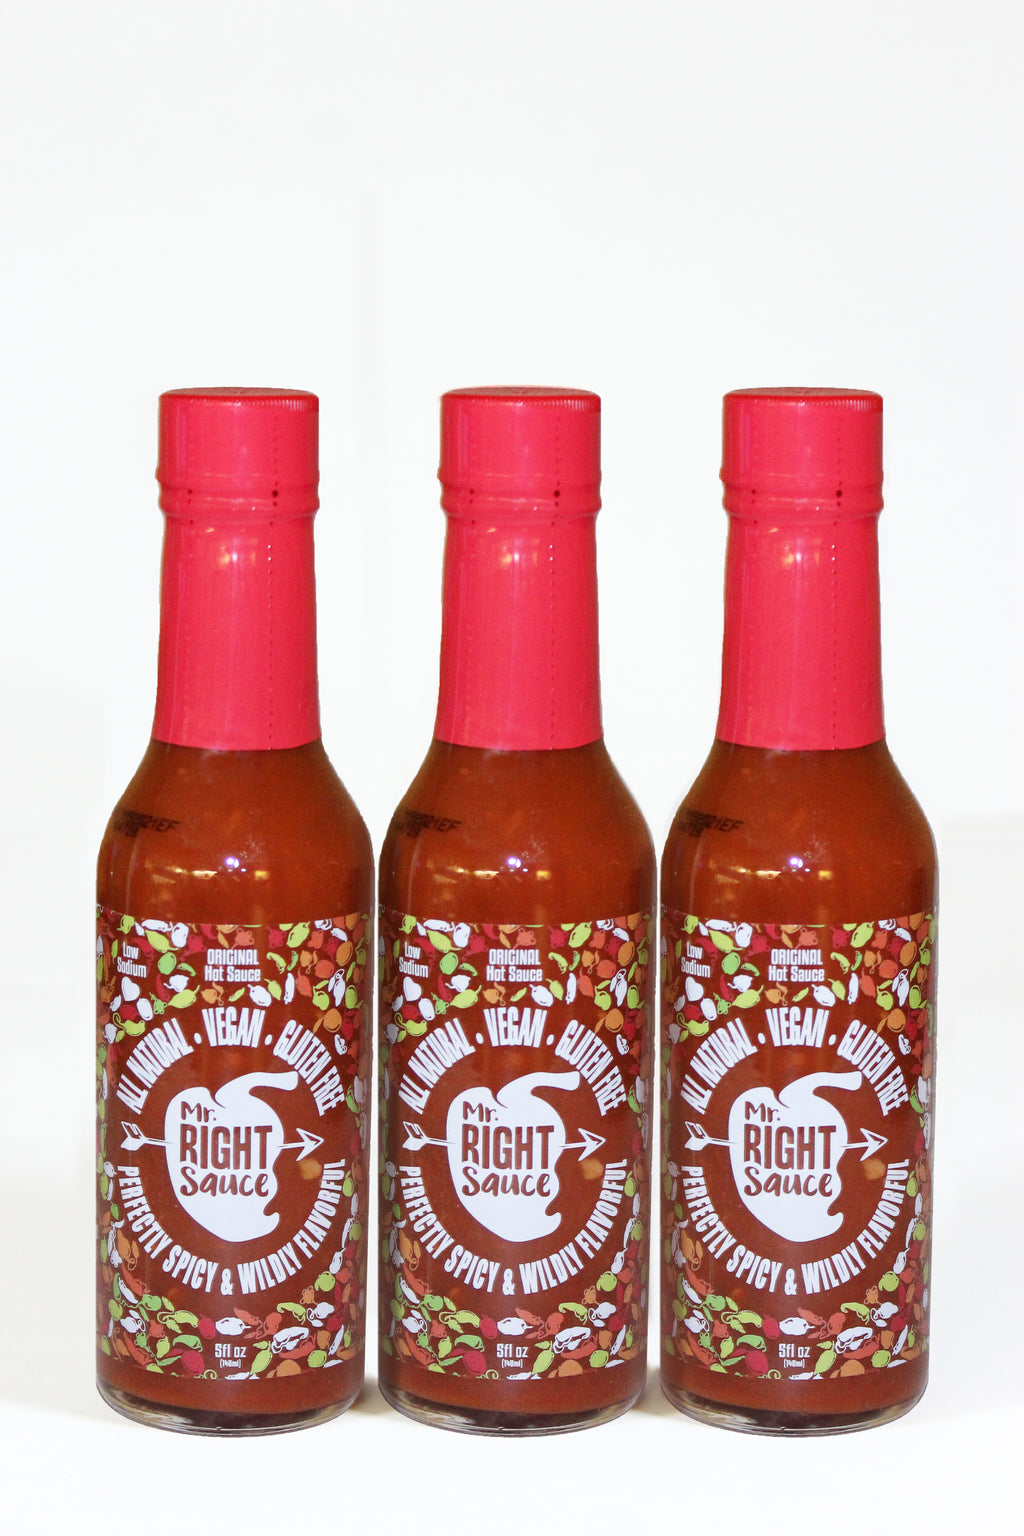 Mr. Right Sauce ~3 Pack  "Perfectly Spicy - Wildly Flavorful"